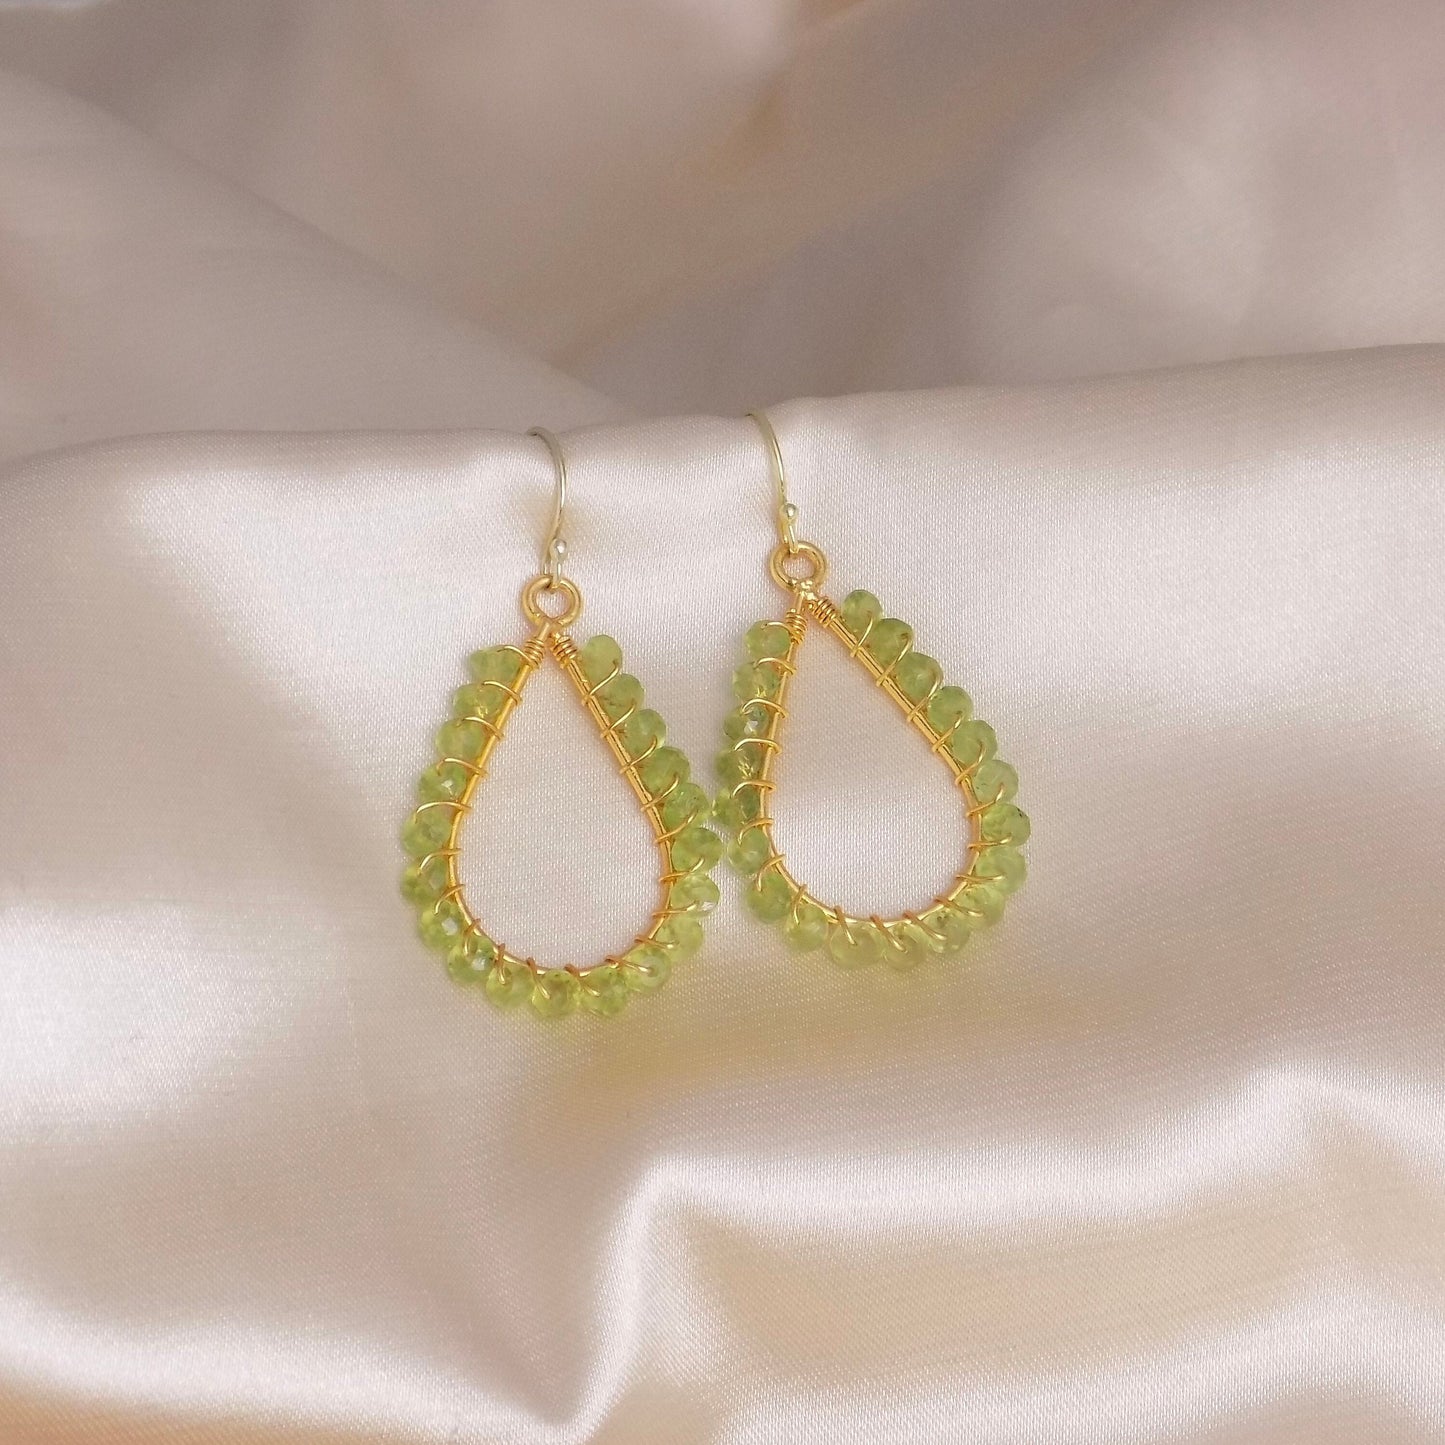 Raw Peridot Earrings Gold, Dainty Crystal Dangle, August Birthstone, Unique Gifts For Best Friend, M7-15